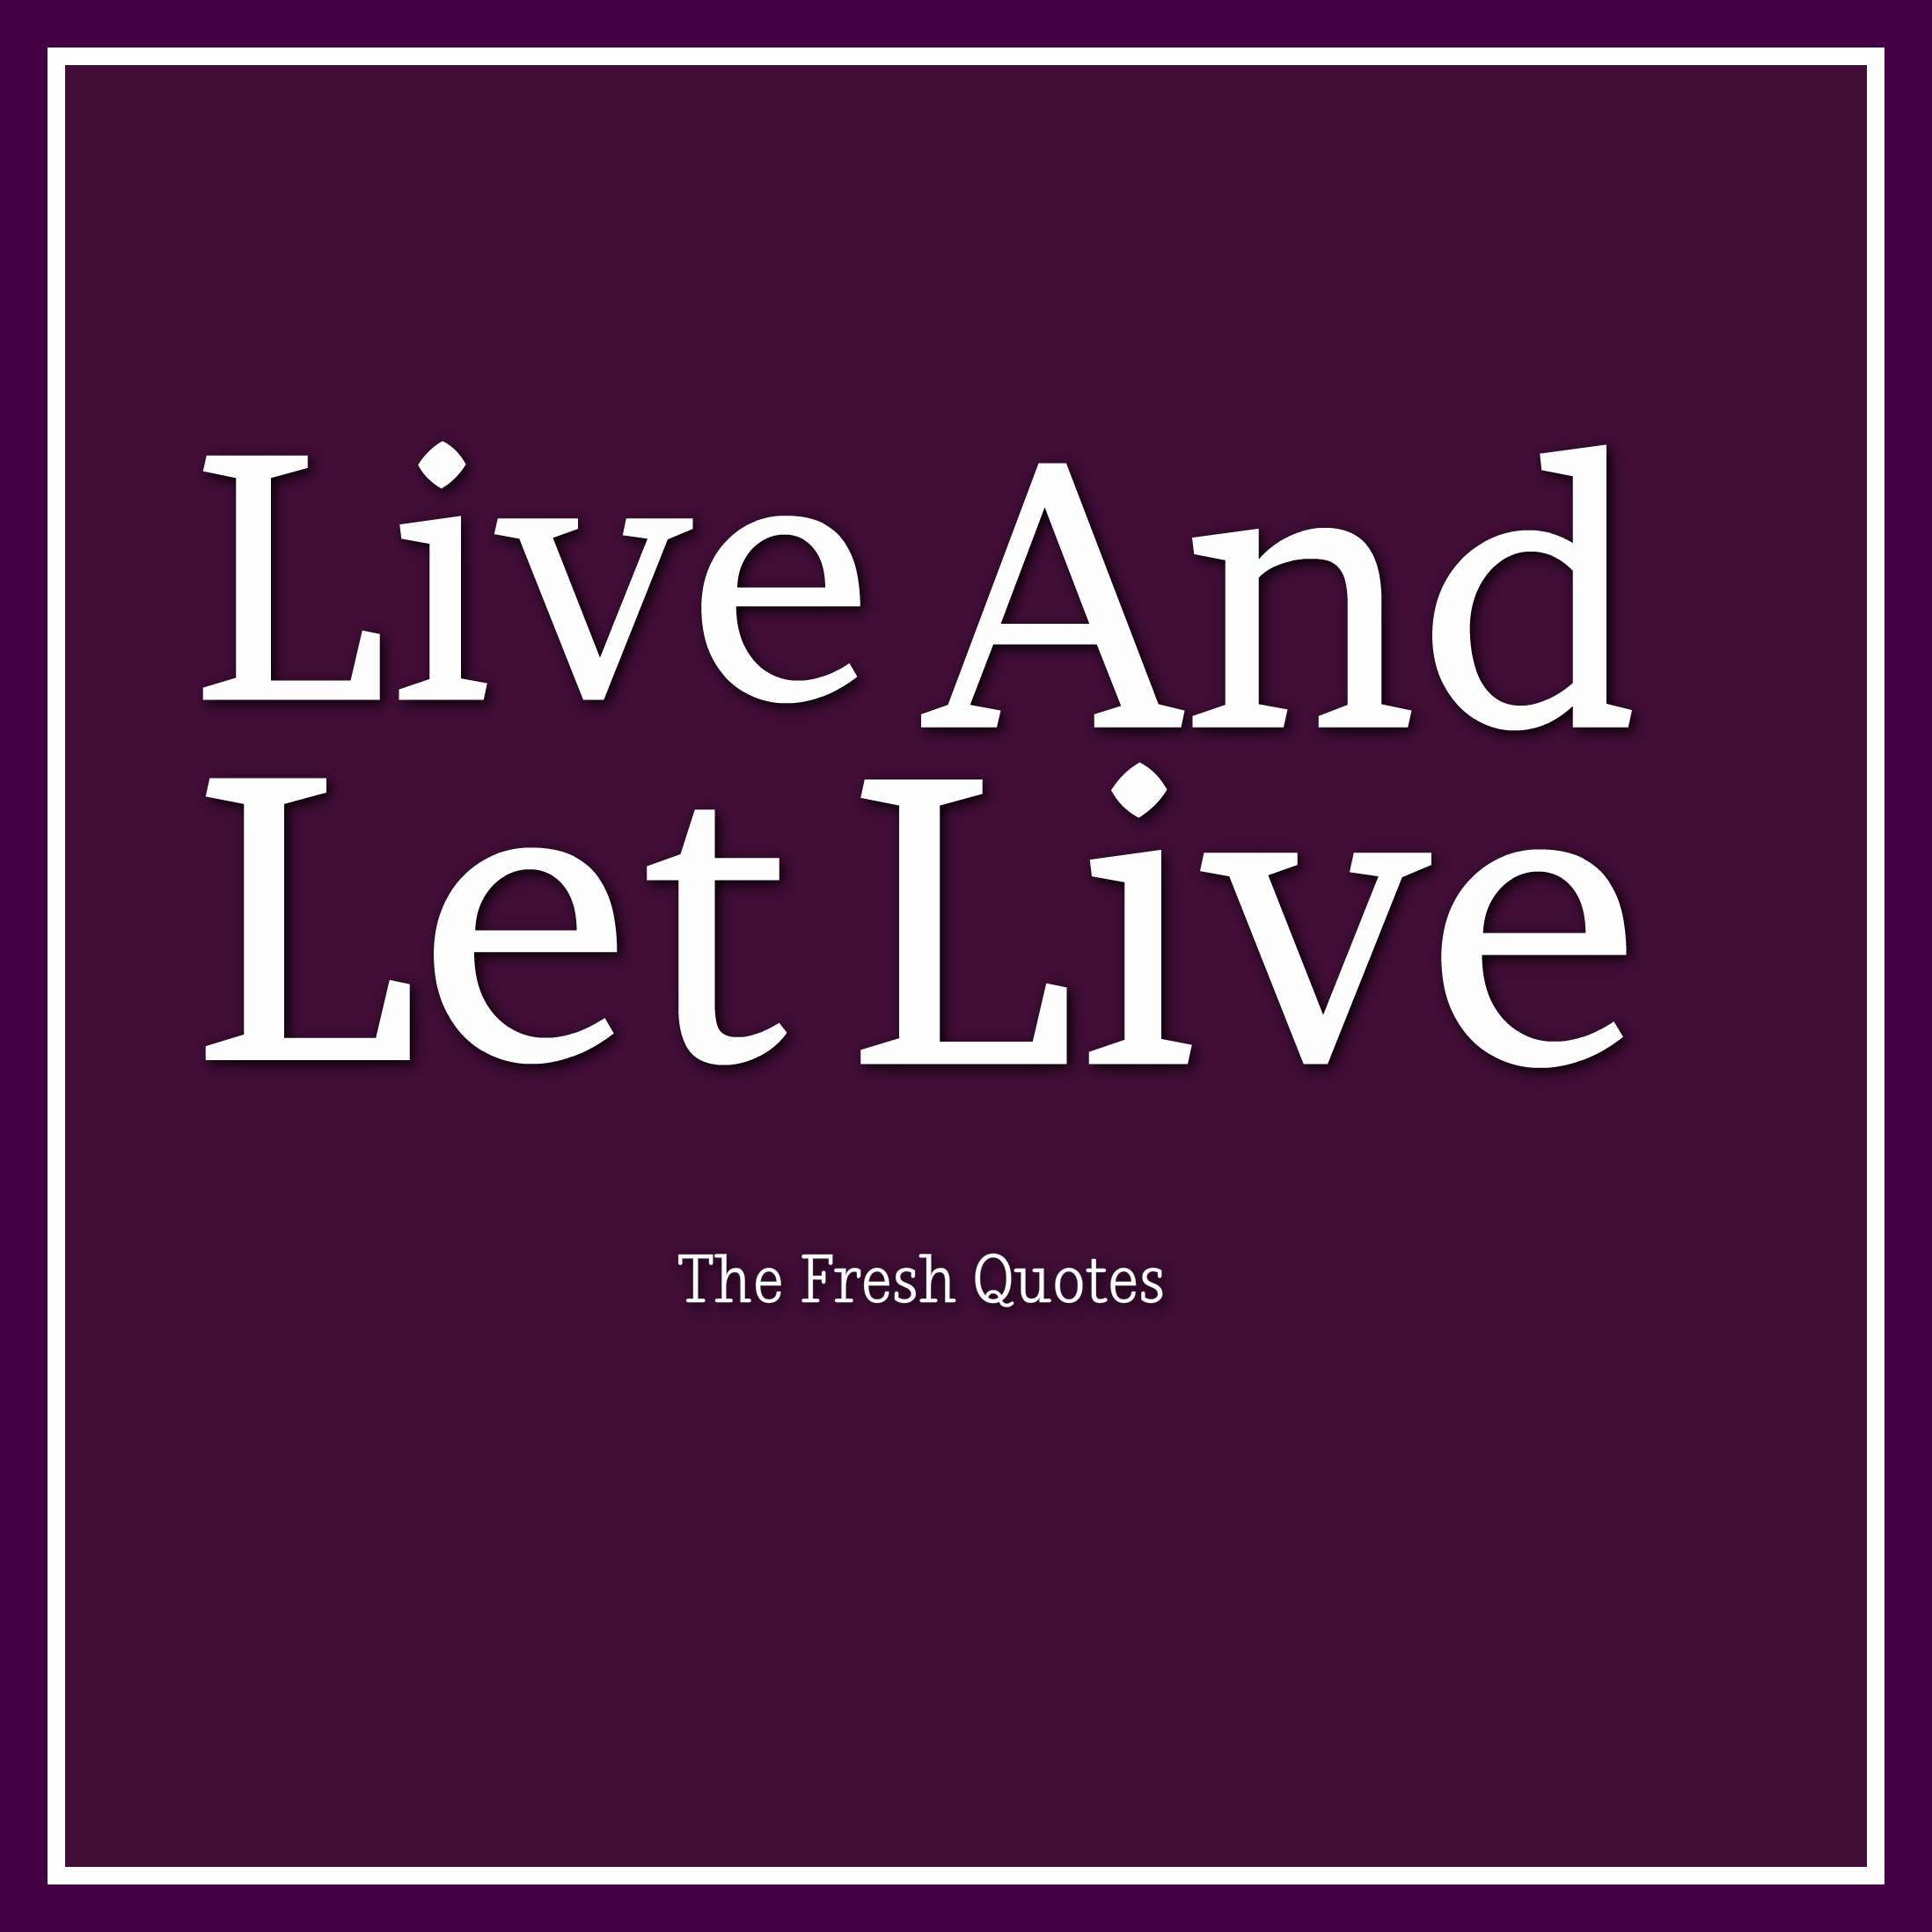 who said live and let live quote